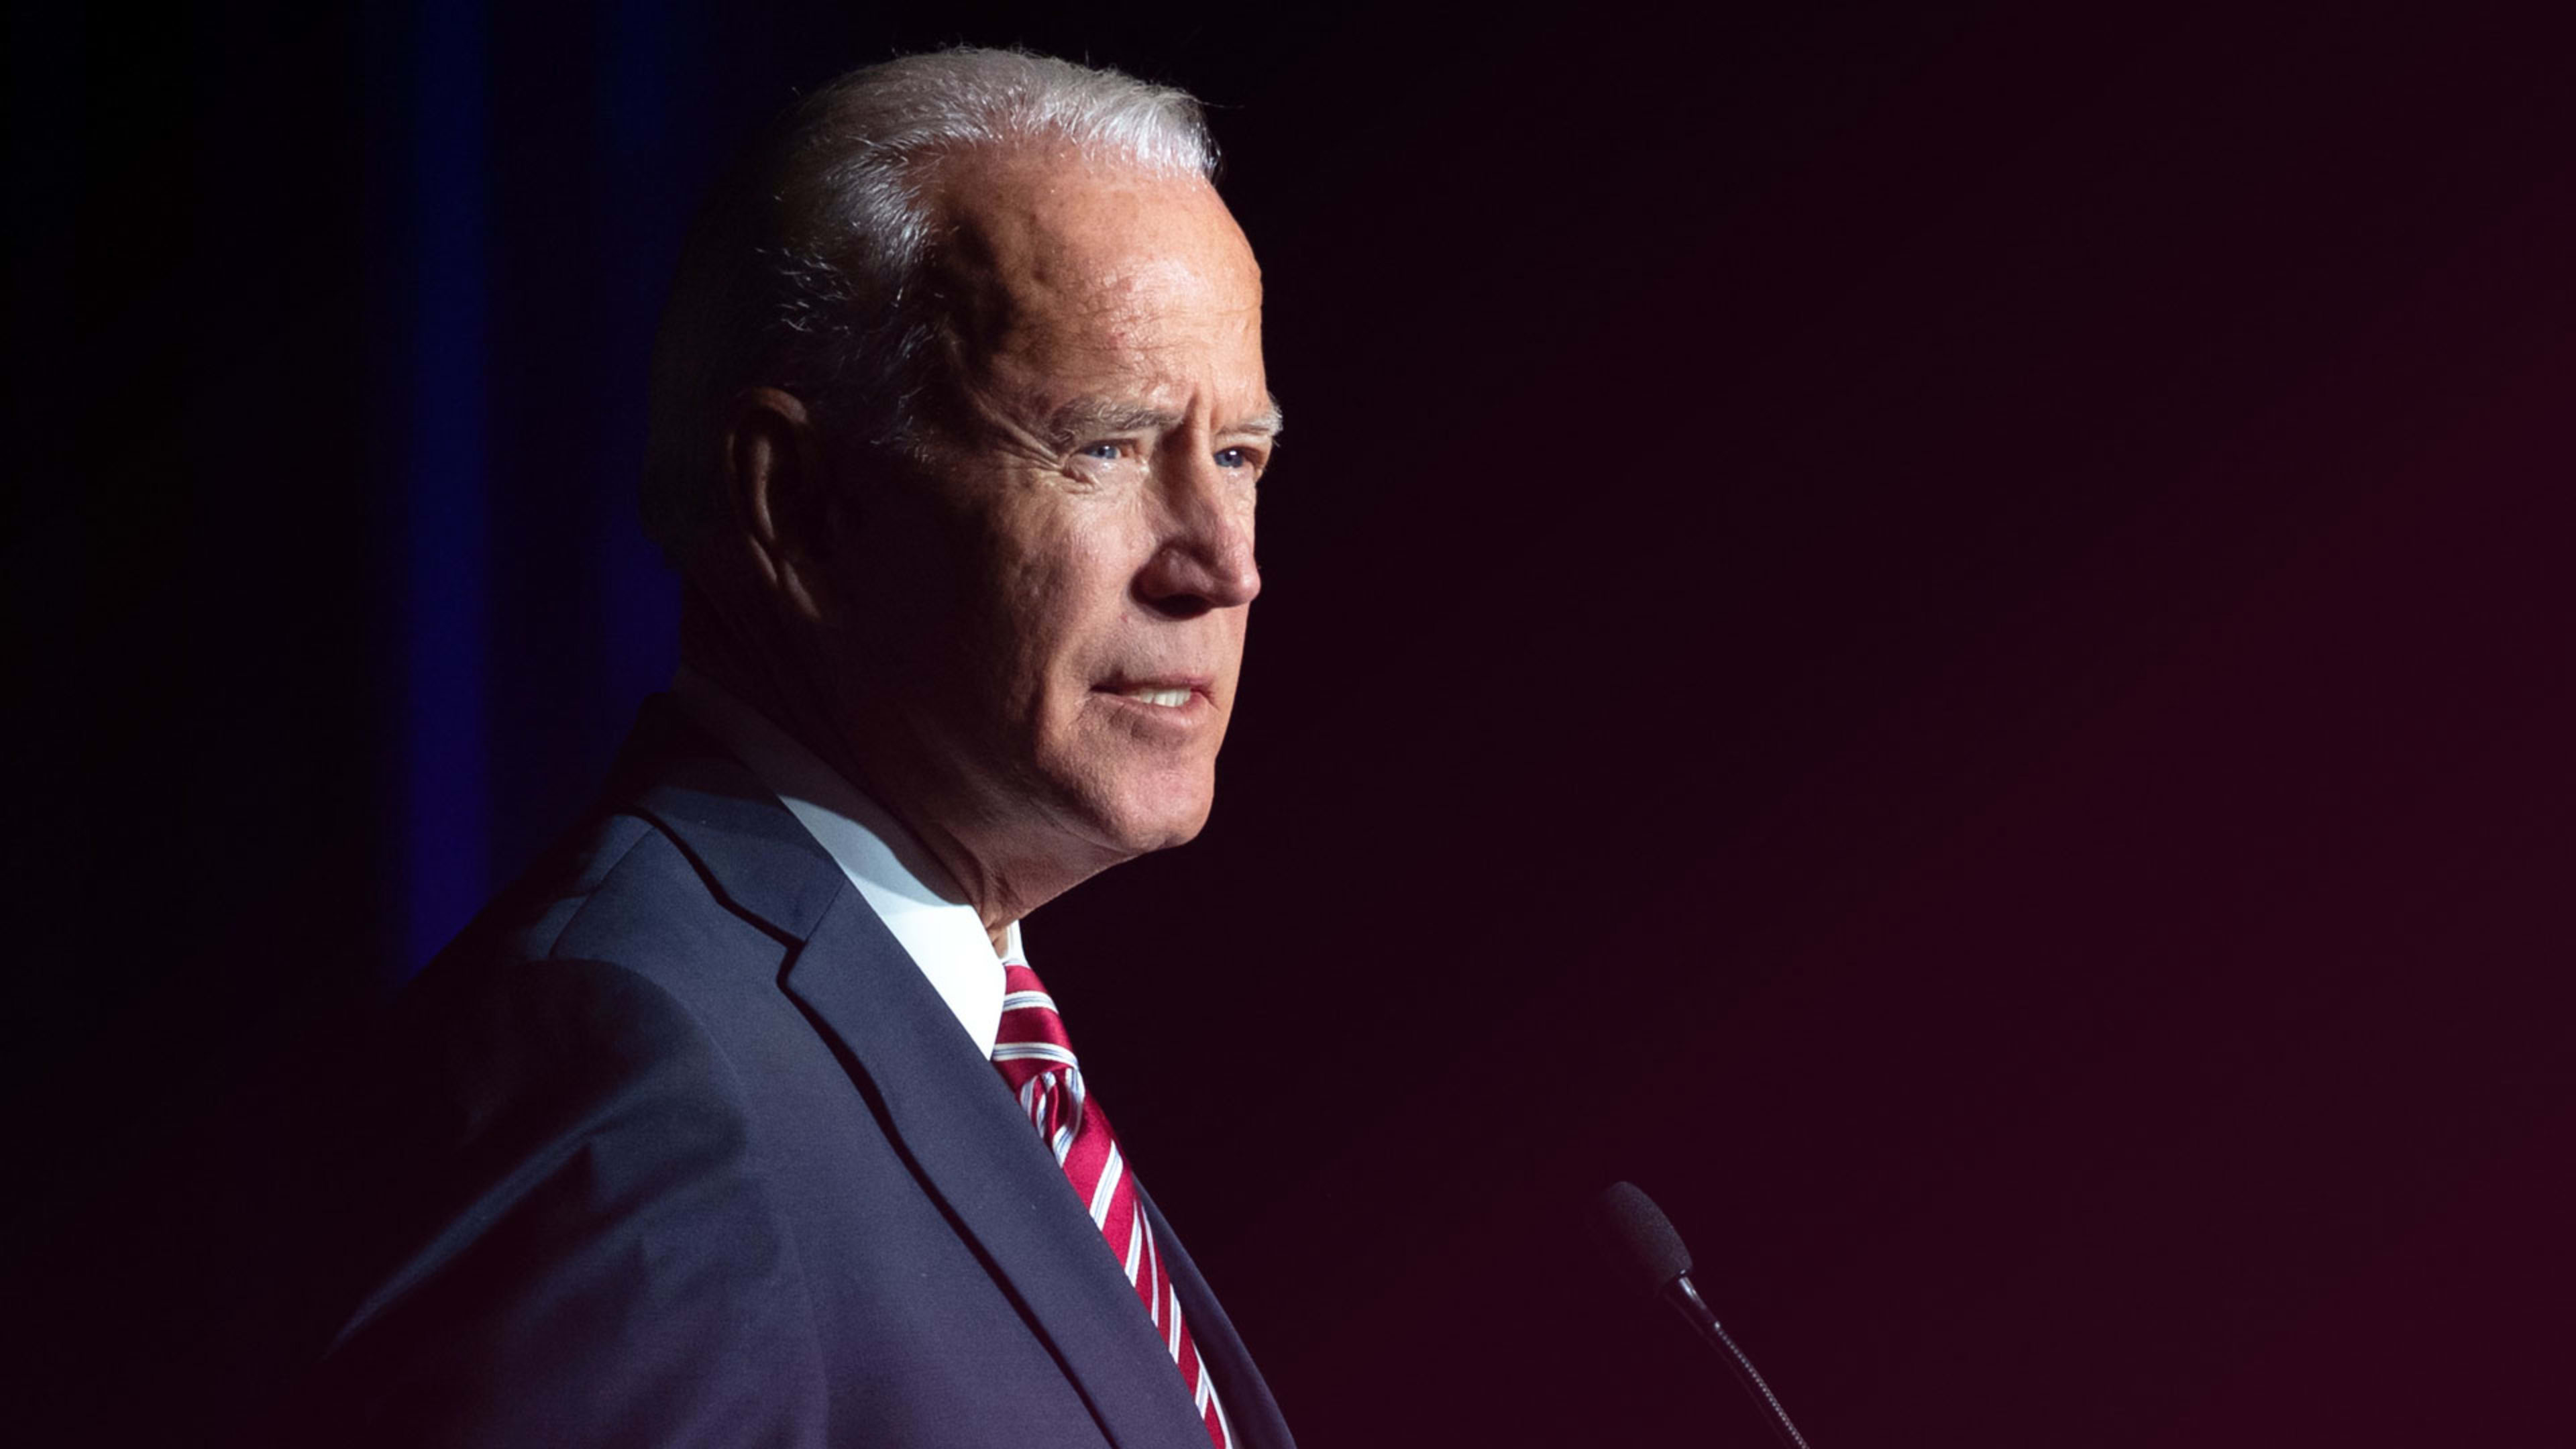 Why men like Joe Biden find it so difficult to apologize